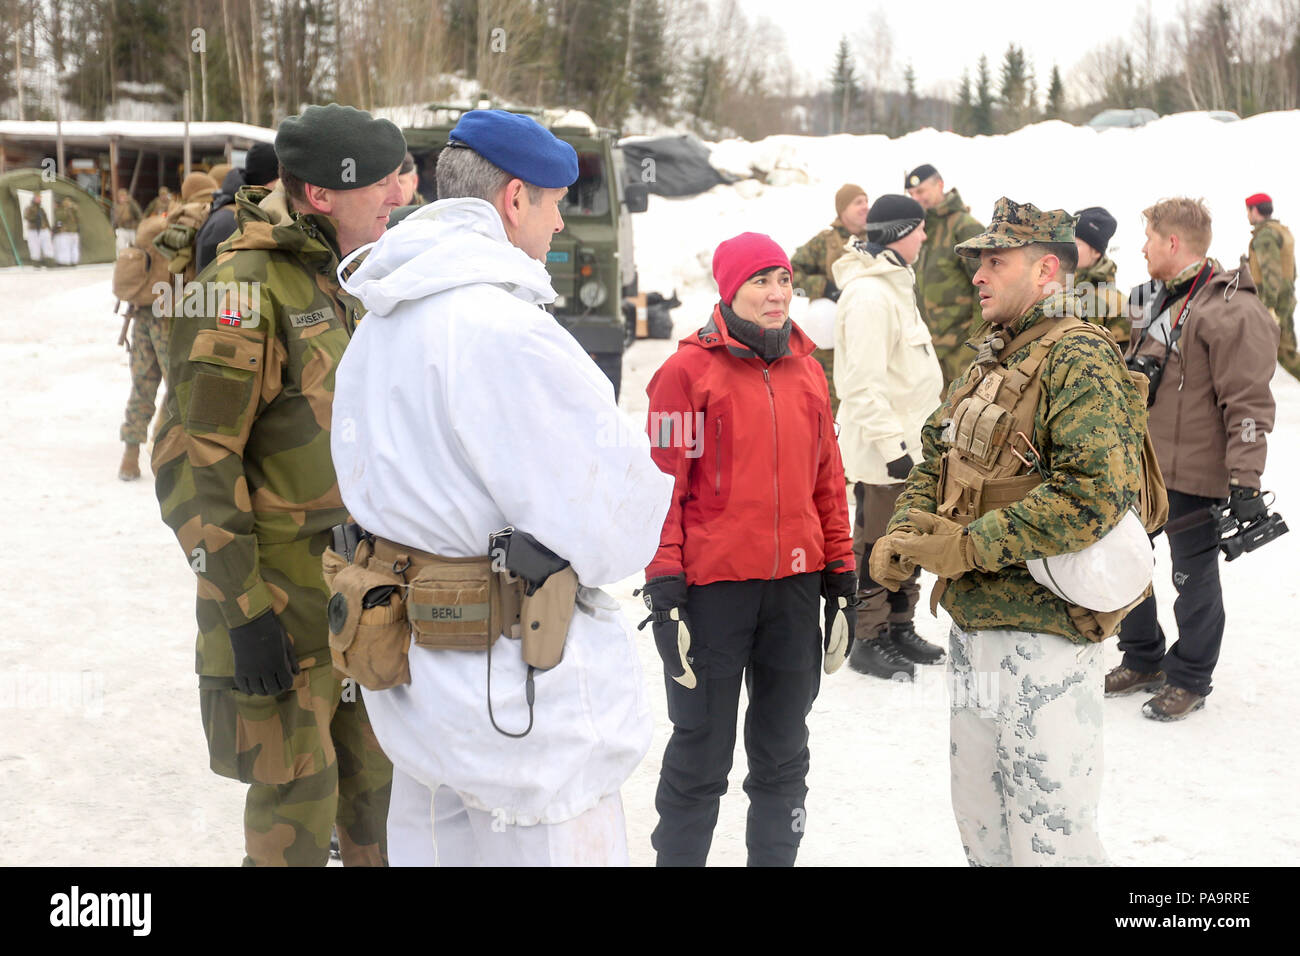 Norwegian Minister of Defense Ine Marie Eriksen Søreide talks with Lt. Col. Justin Ansel, the commanding officer of Task Force 1/8, and officers from Norway and Sweden at a training location near Steinkjer, Norway, March 2, 2016. Exercise Cold Response 16 is a multinational exercise combining the efforts of 13 NATO allies and partner nations and approximately 15,000 troops taking place across Norway. (U.S. Marine Corps photo by Cpl. Dalton A. Precht/released) Stock Photo